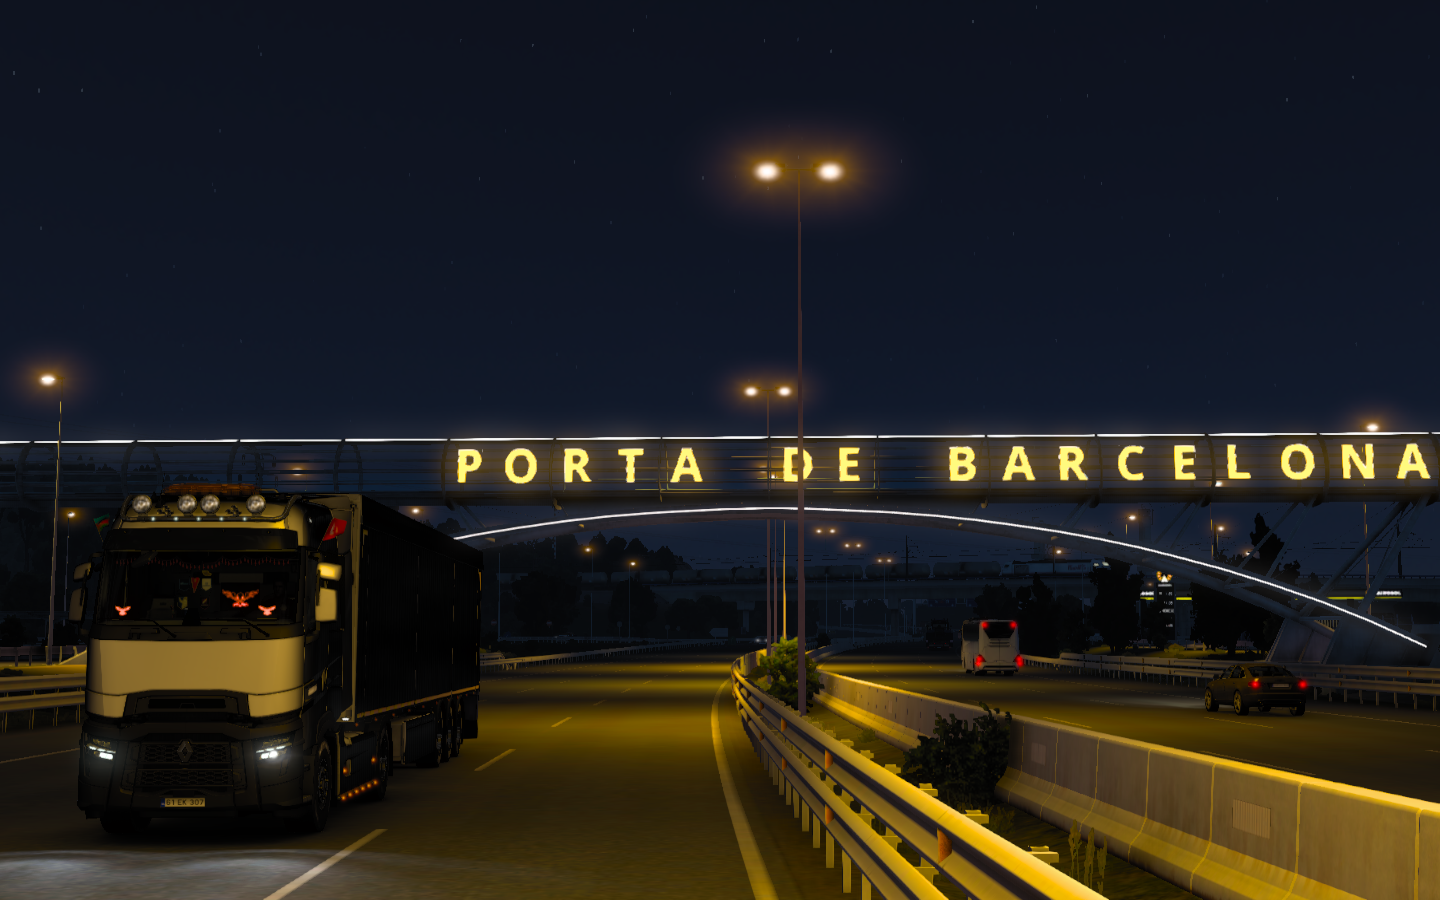 ets2_20210408_213302_00.png